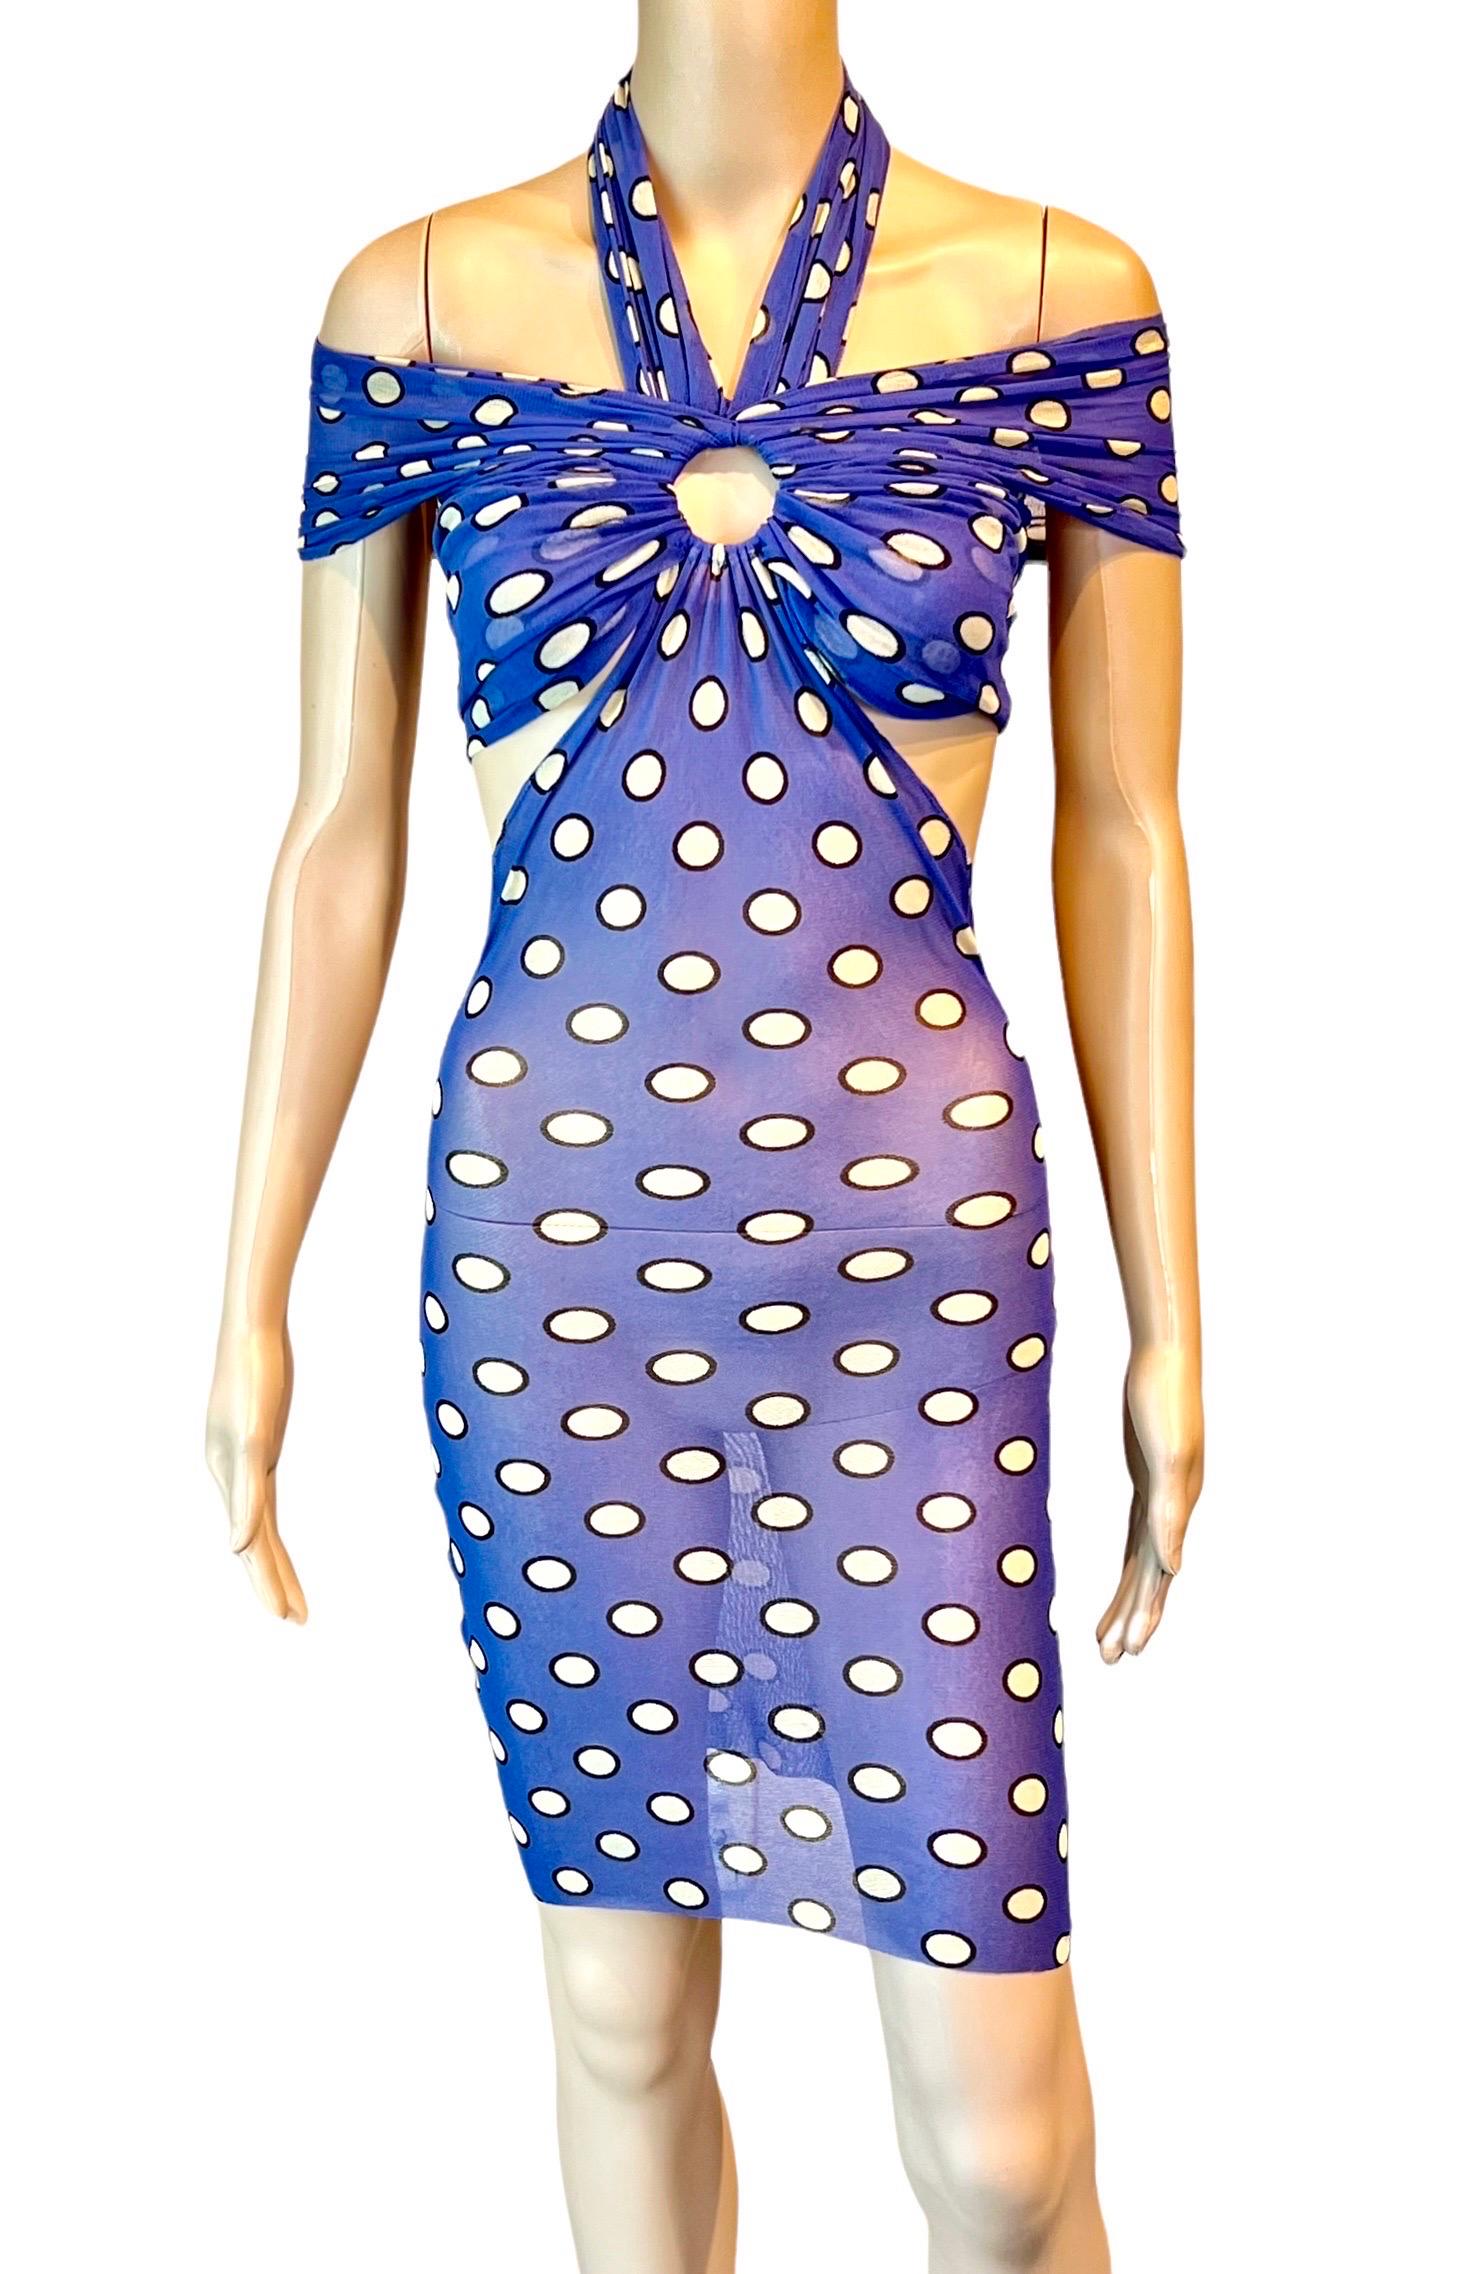 Jean Paul Gaultier Soleil S/S 1999 Cutout Polka Dot Mesh Bodycon Mini Dress In Good Condition For Sale In Naples, FL